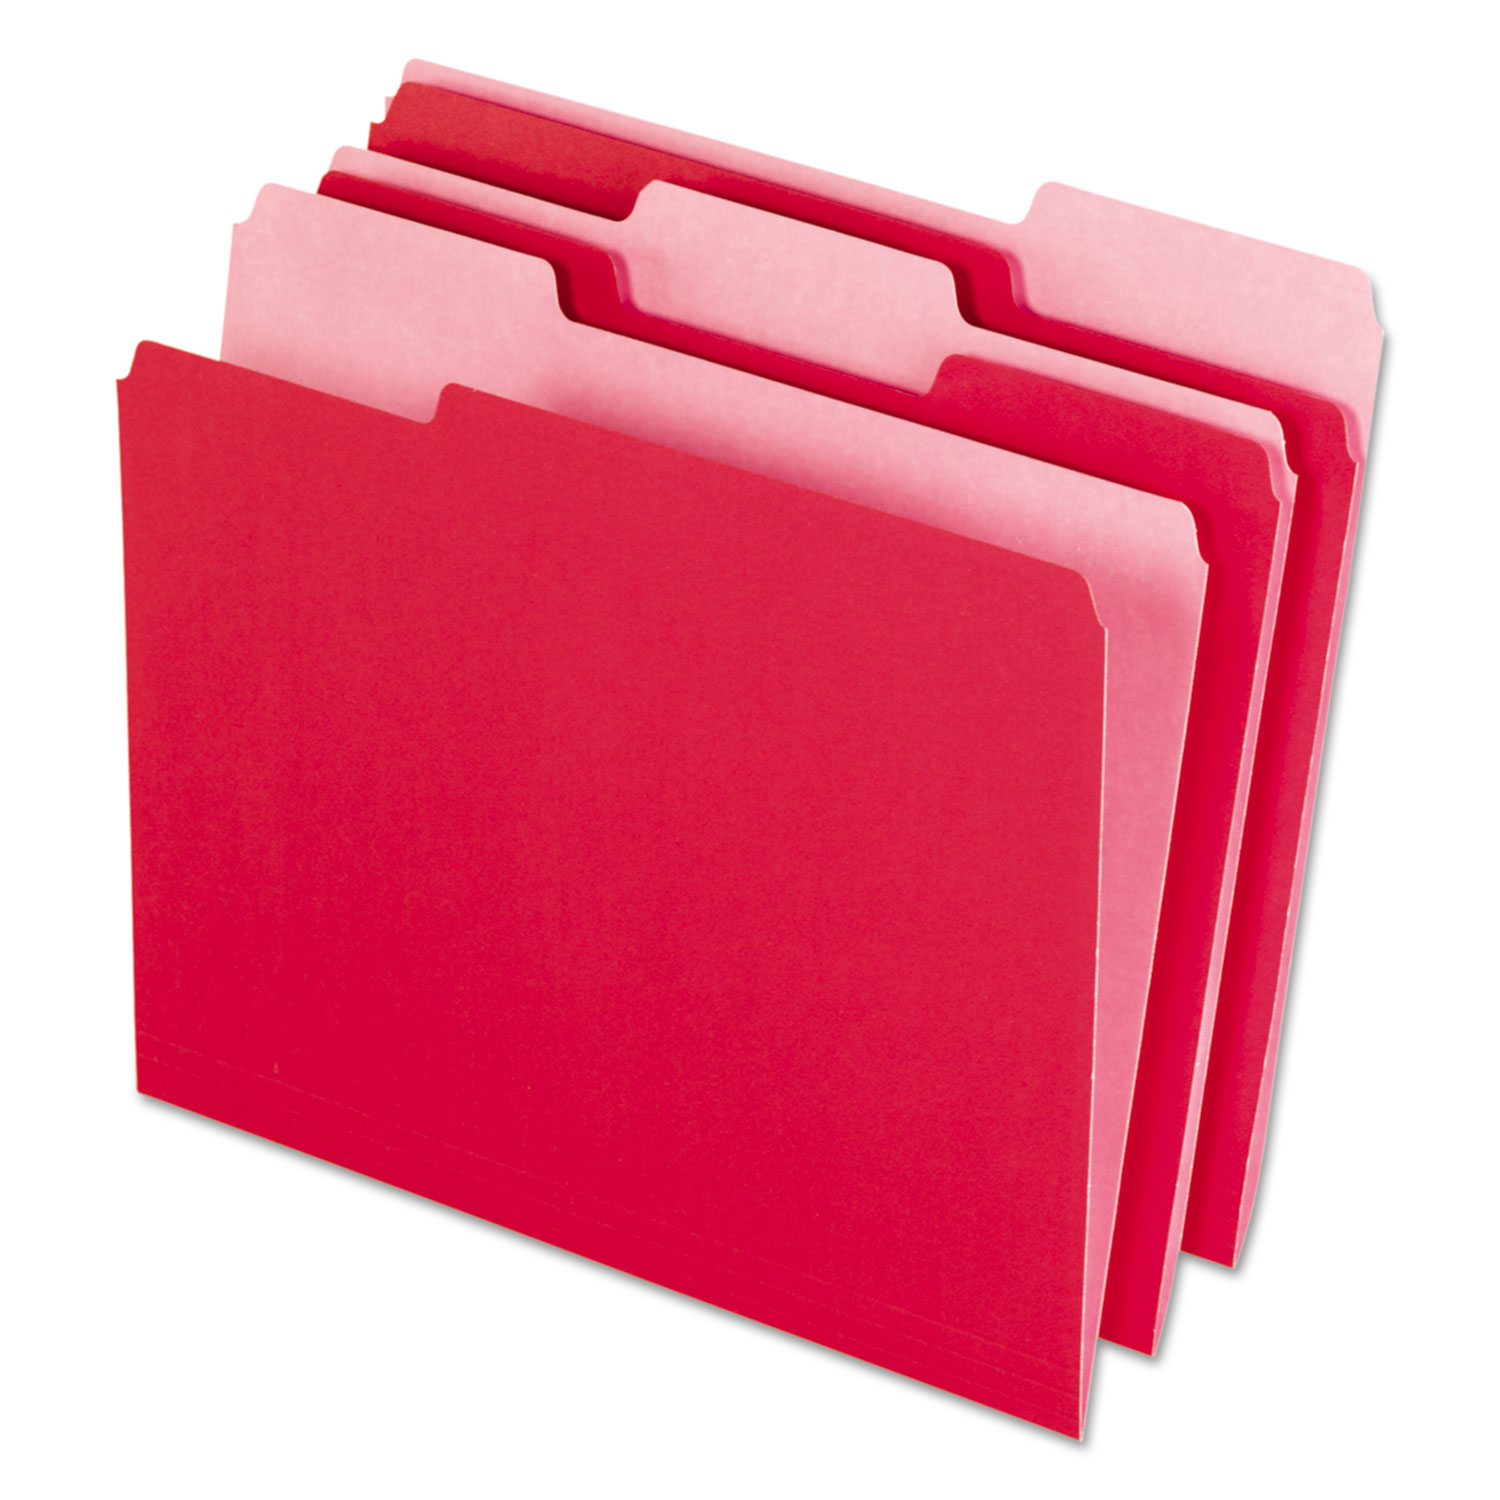  Pendaflex 4210 1/3 RED Interior File Folders, 1/3-Cut Tabs, Letter Size, Red, 100/Box (PFX421013RED) 